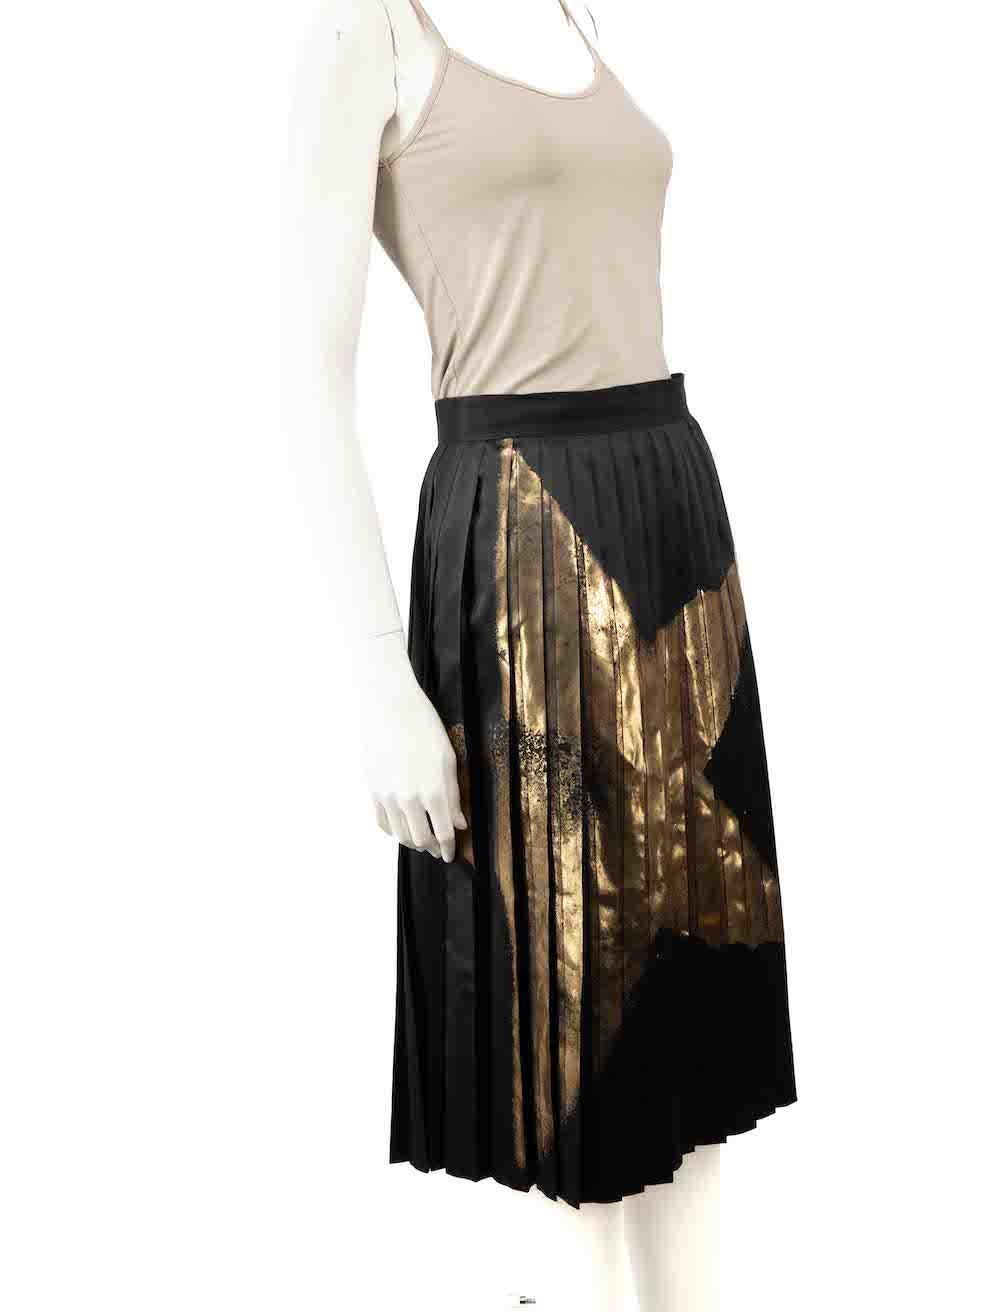 CONDITION is Never worn. No visible wear to the skirt is evident on this new Golden Goose designer resale item. This item comes with original garment bag.
 
 
 
 Details
 
 
 Black
 
 Polyester
 
 Pleated skirt
 
 Midi length
 
 Metallic Riley star